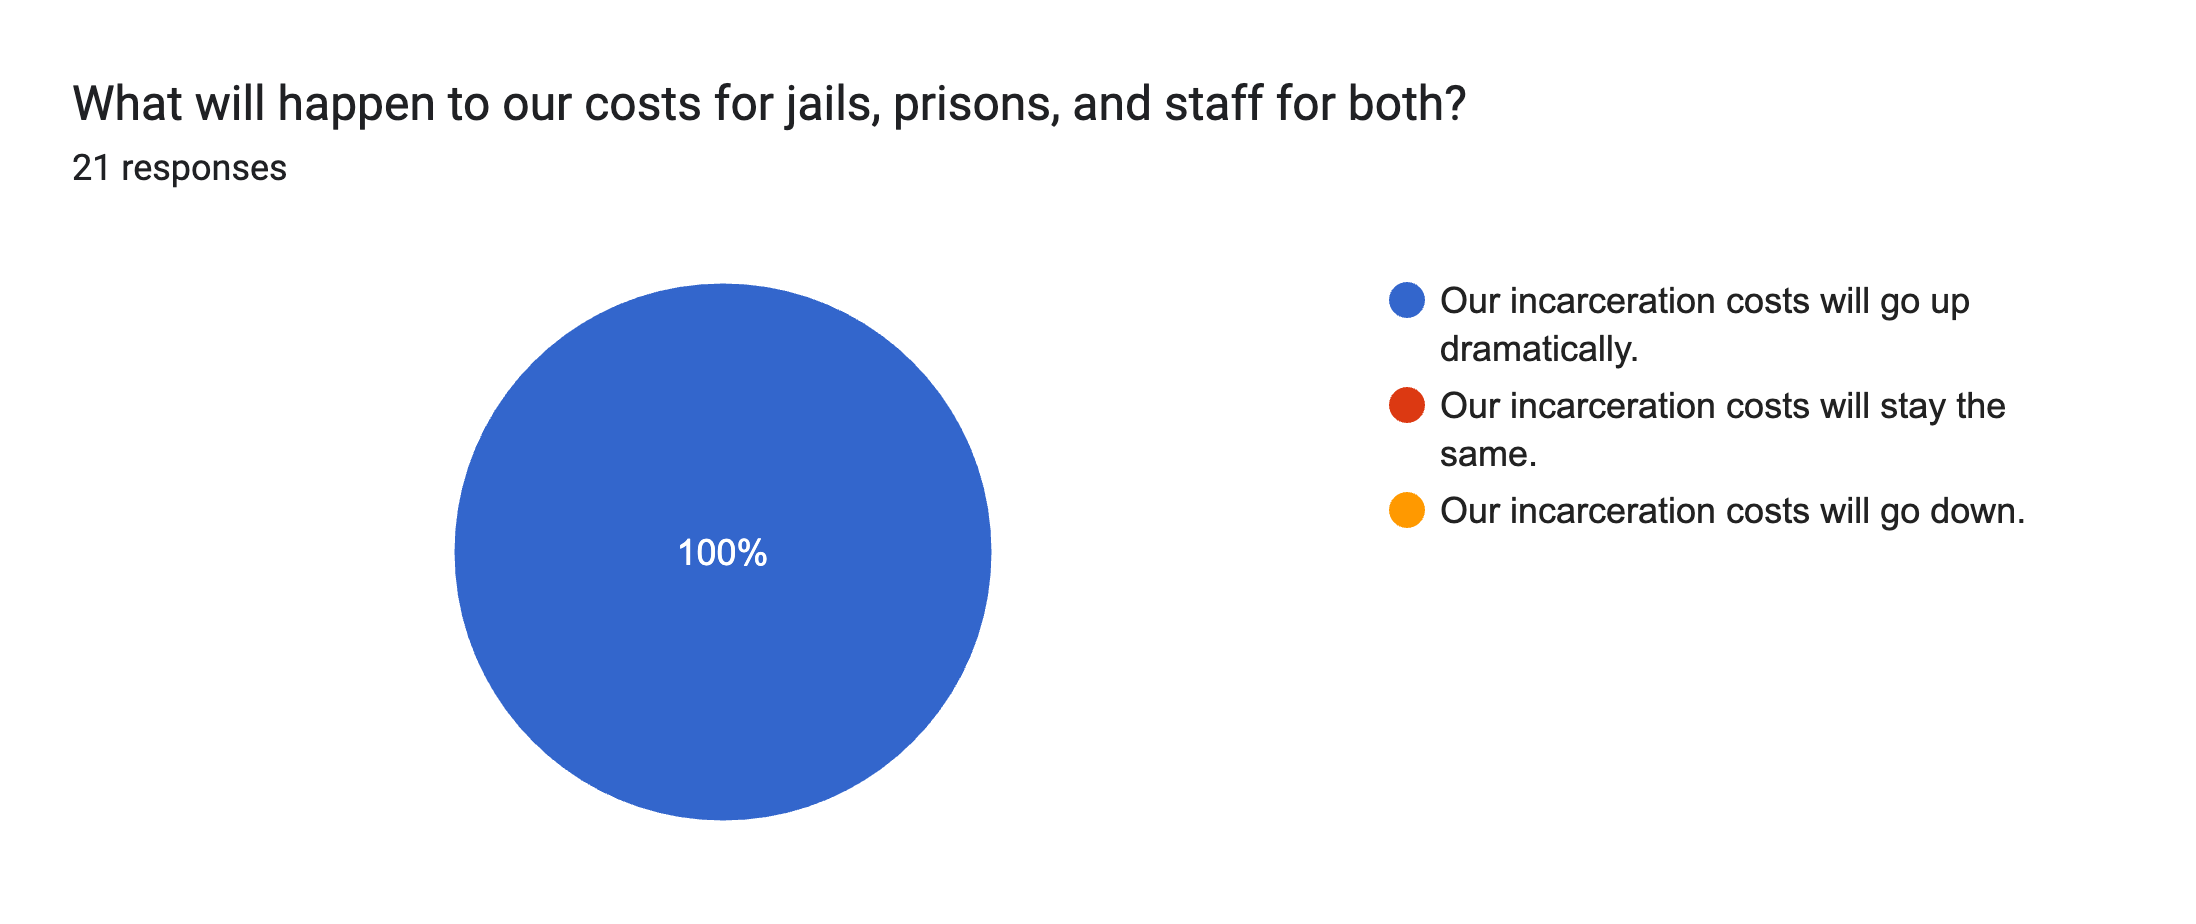 Forms response chart. Question title: What will happen to our costs for jails, prisons, and staff for both?. Number of responses: 21 responses.